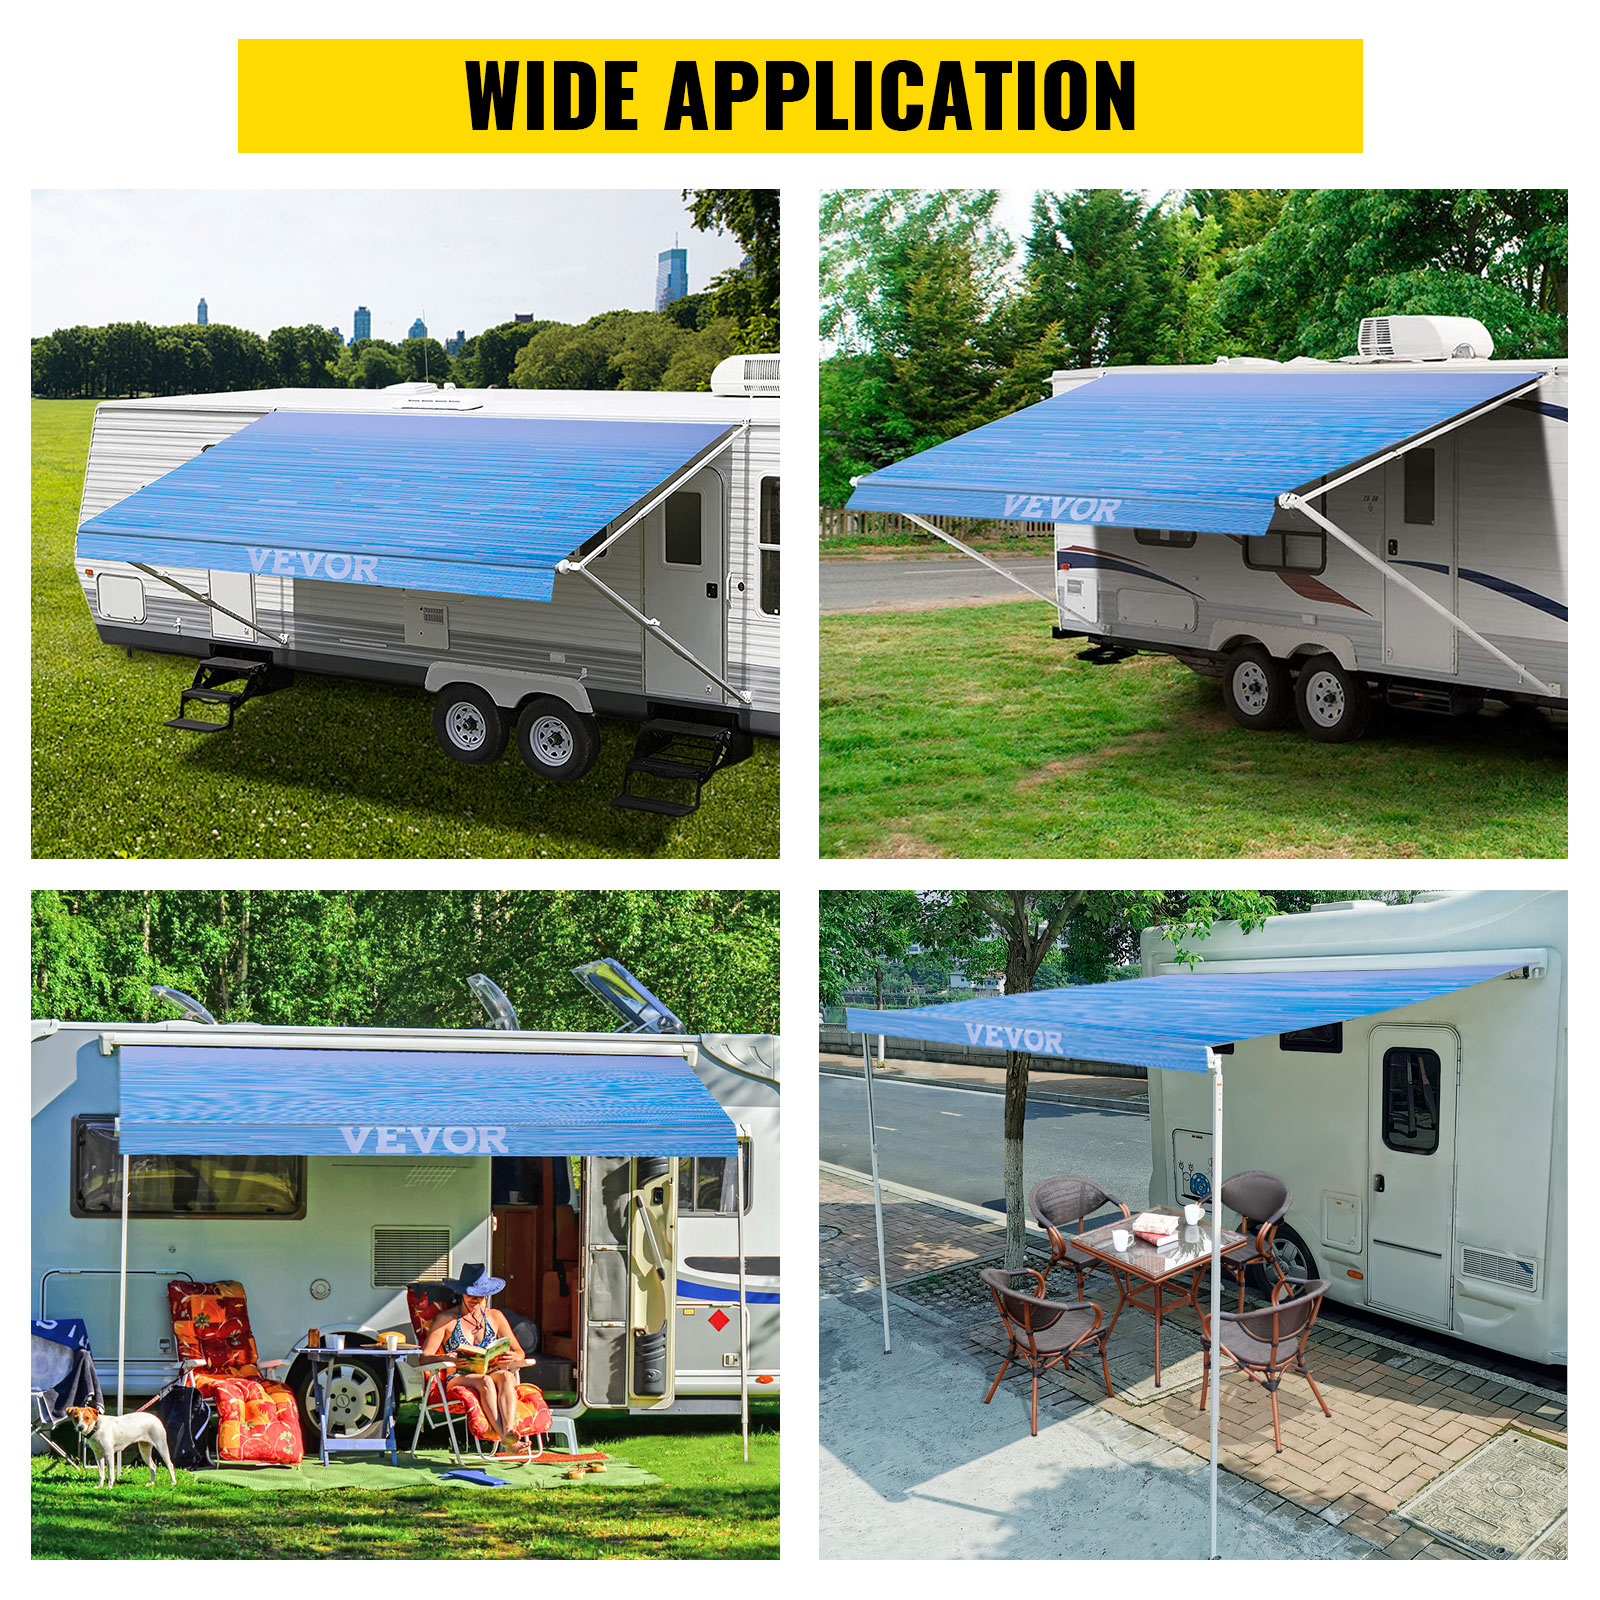 VEVOR RV Awning 20' Camper Awning Fabric, Trailer Awning Canopy Patio ...